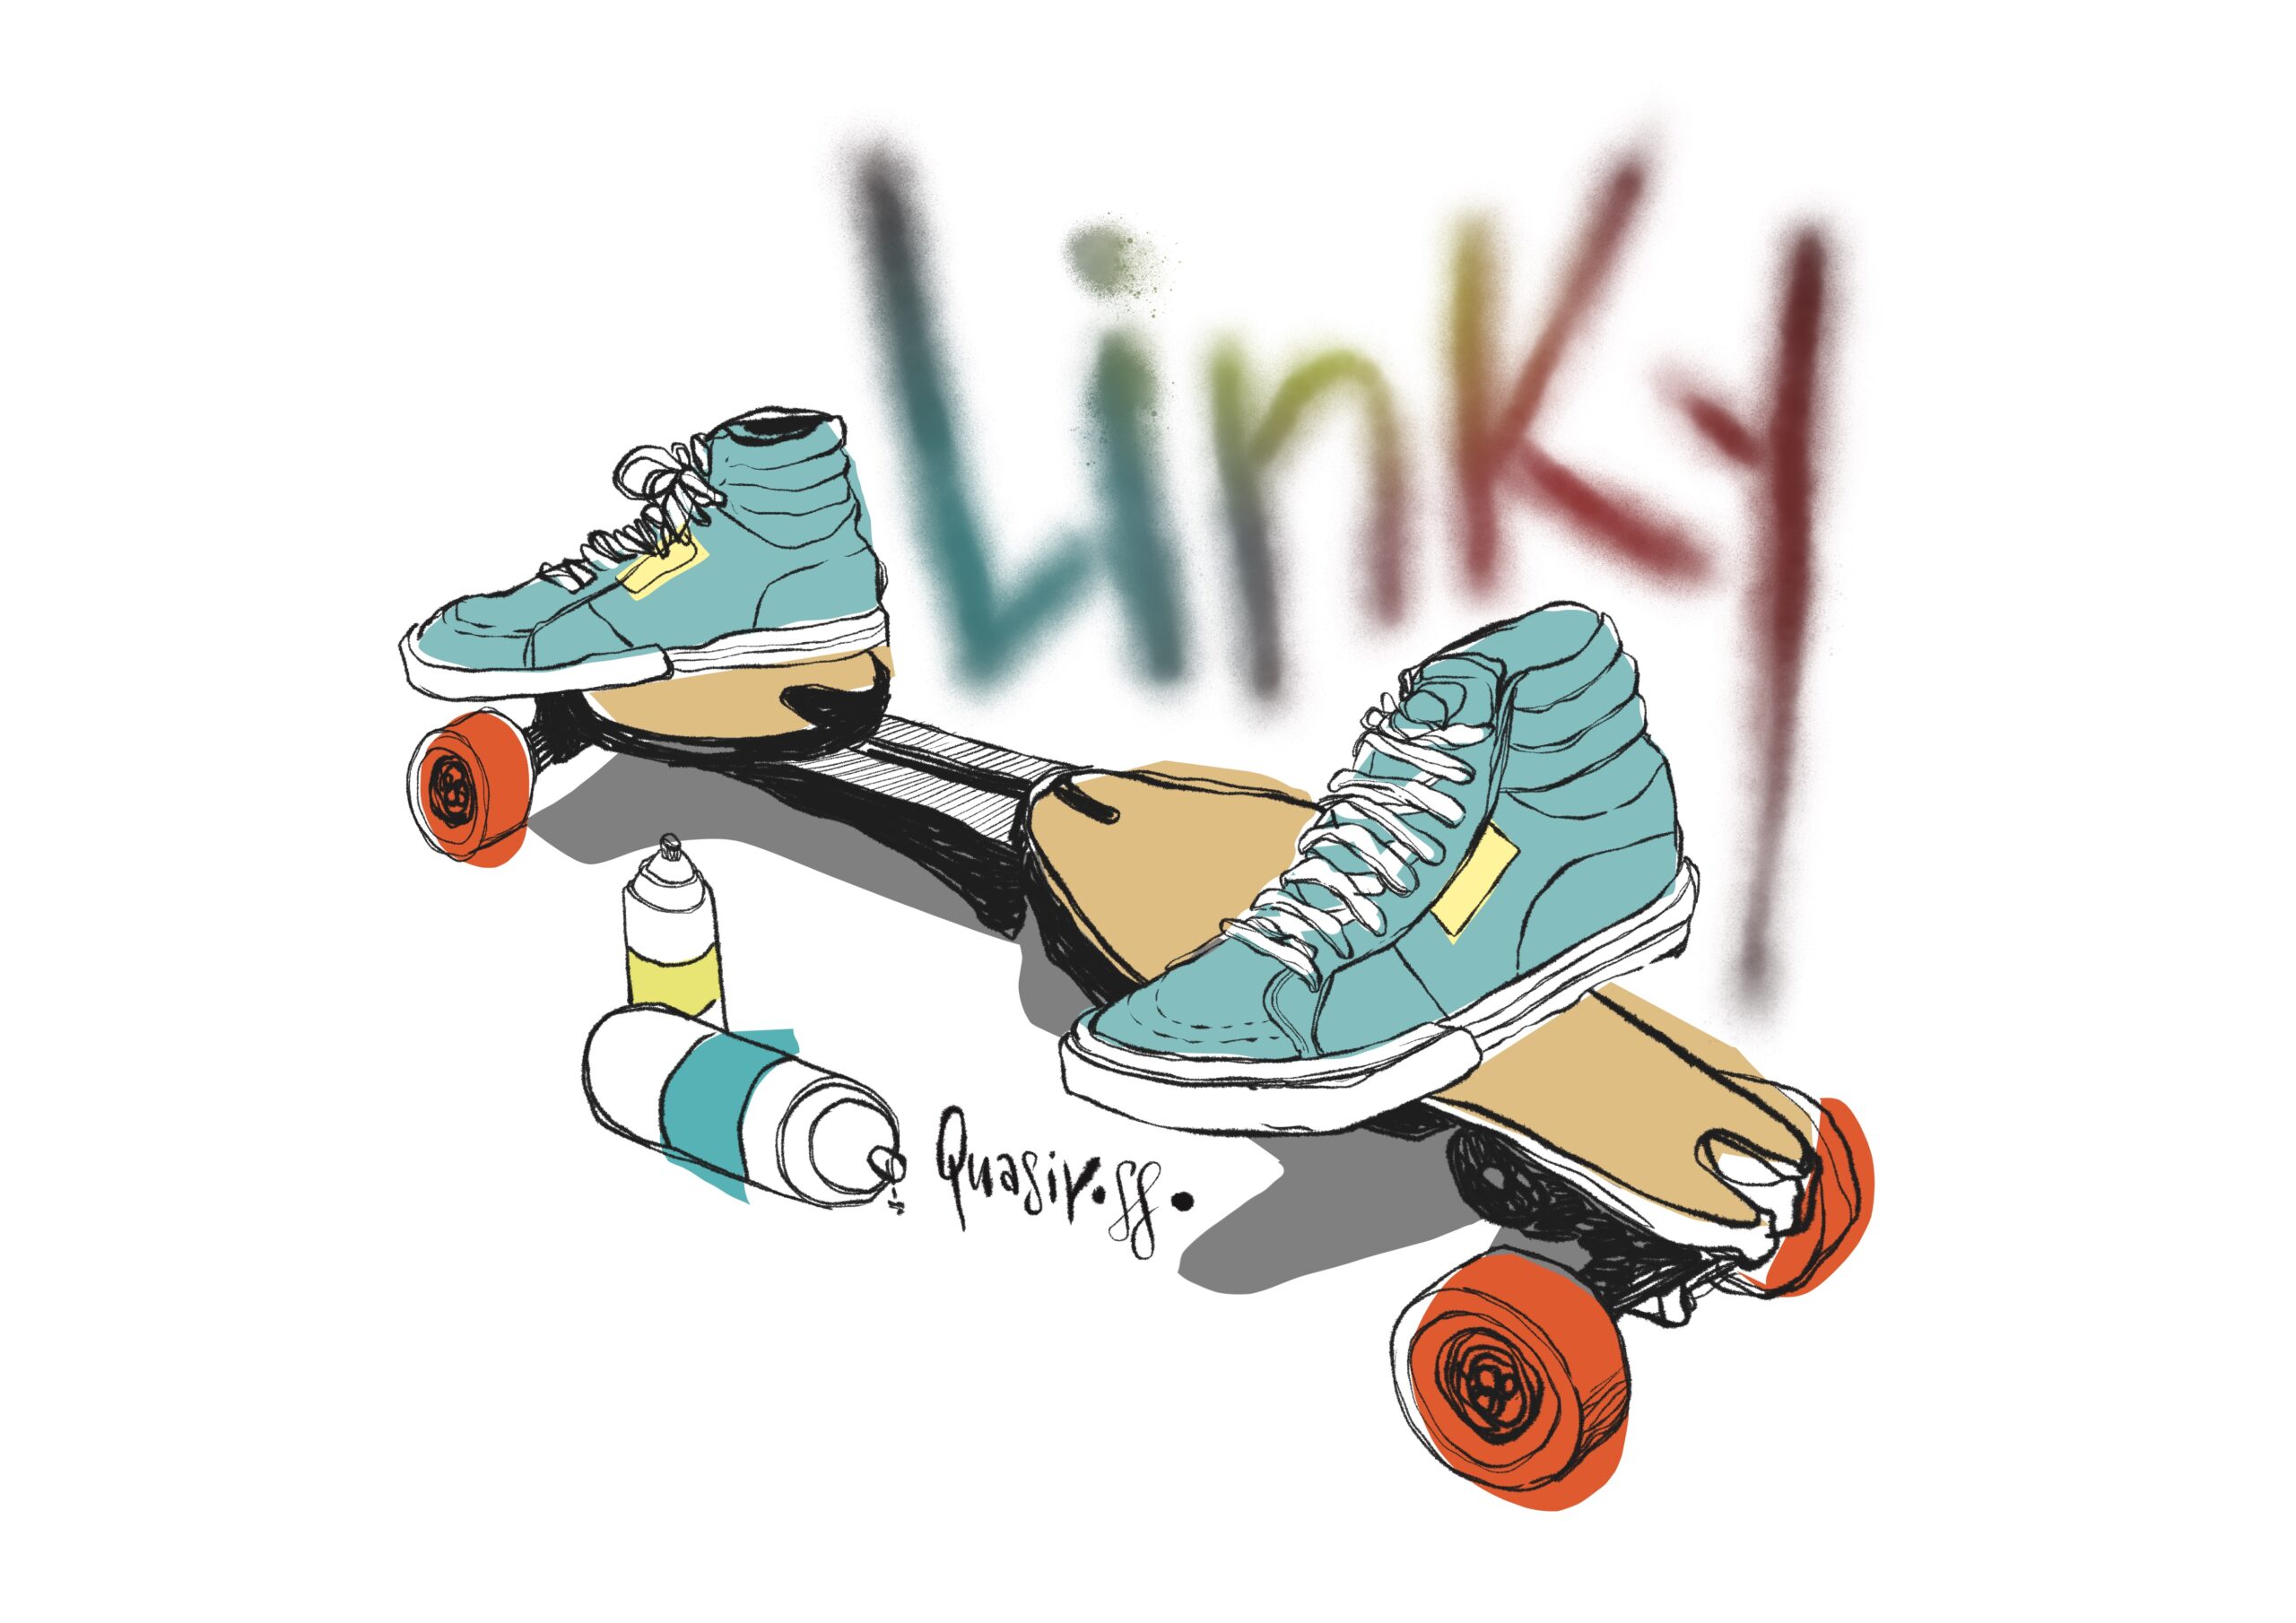 Updates On The New Linky Deck